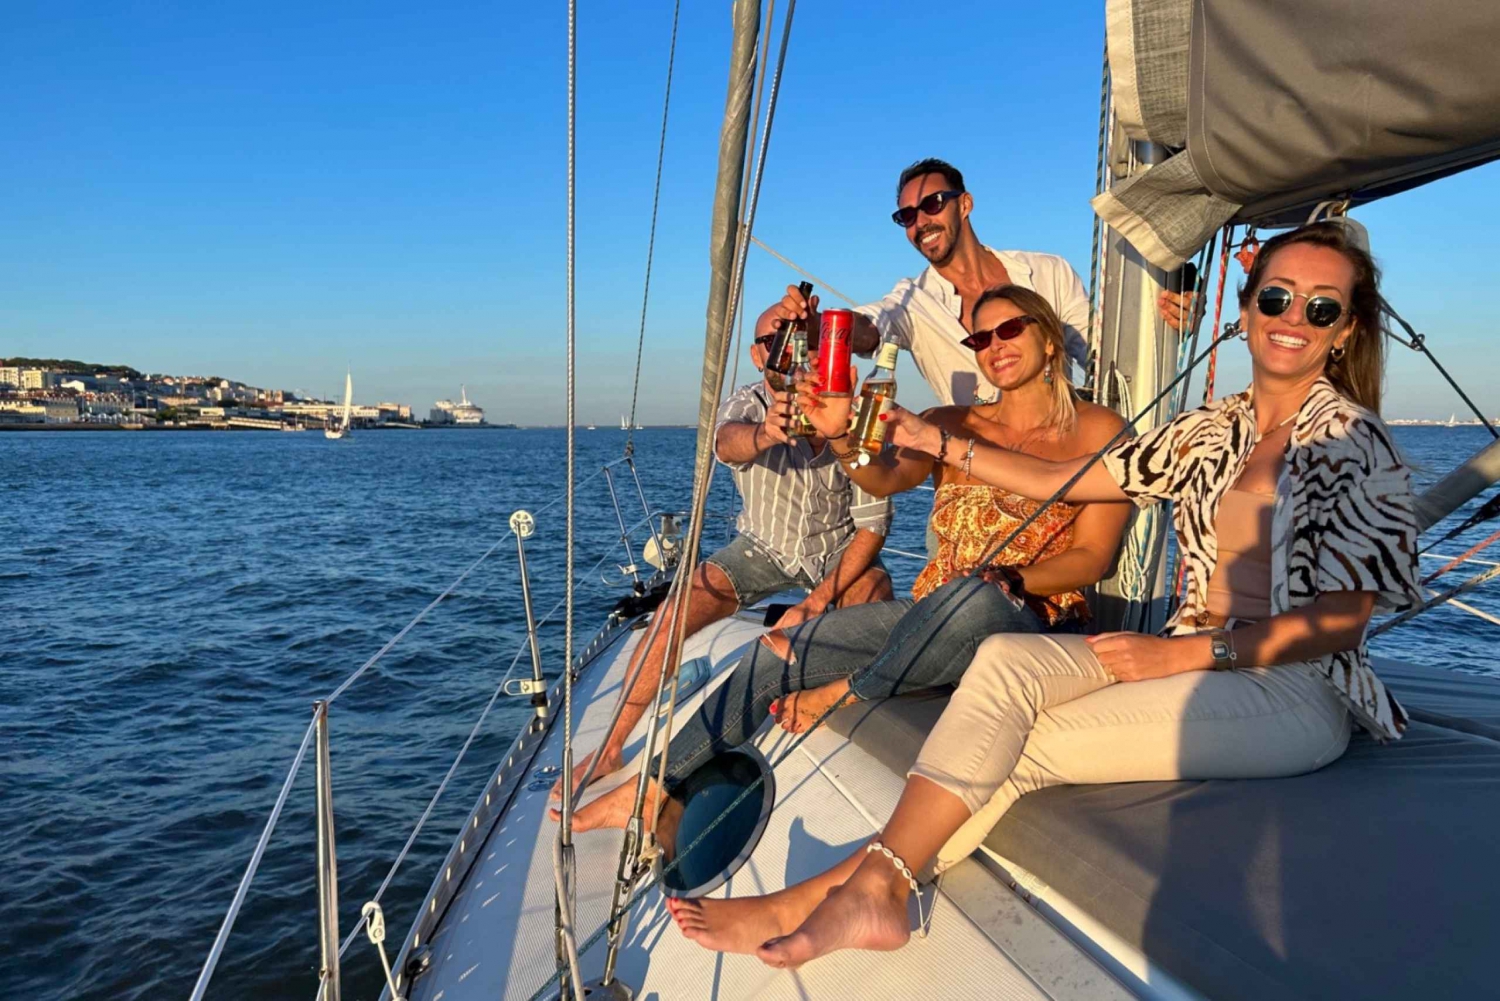 Sunset Sailing Tour on the Tagus river